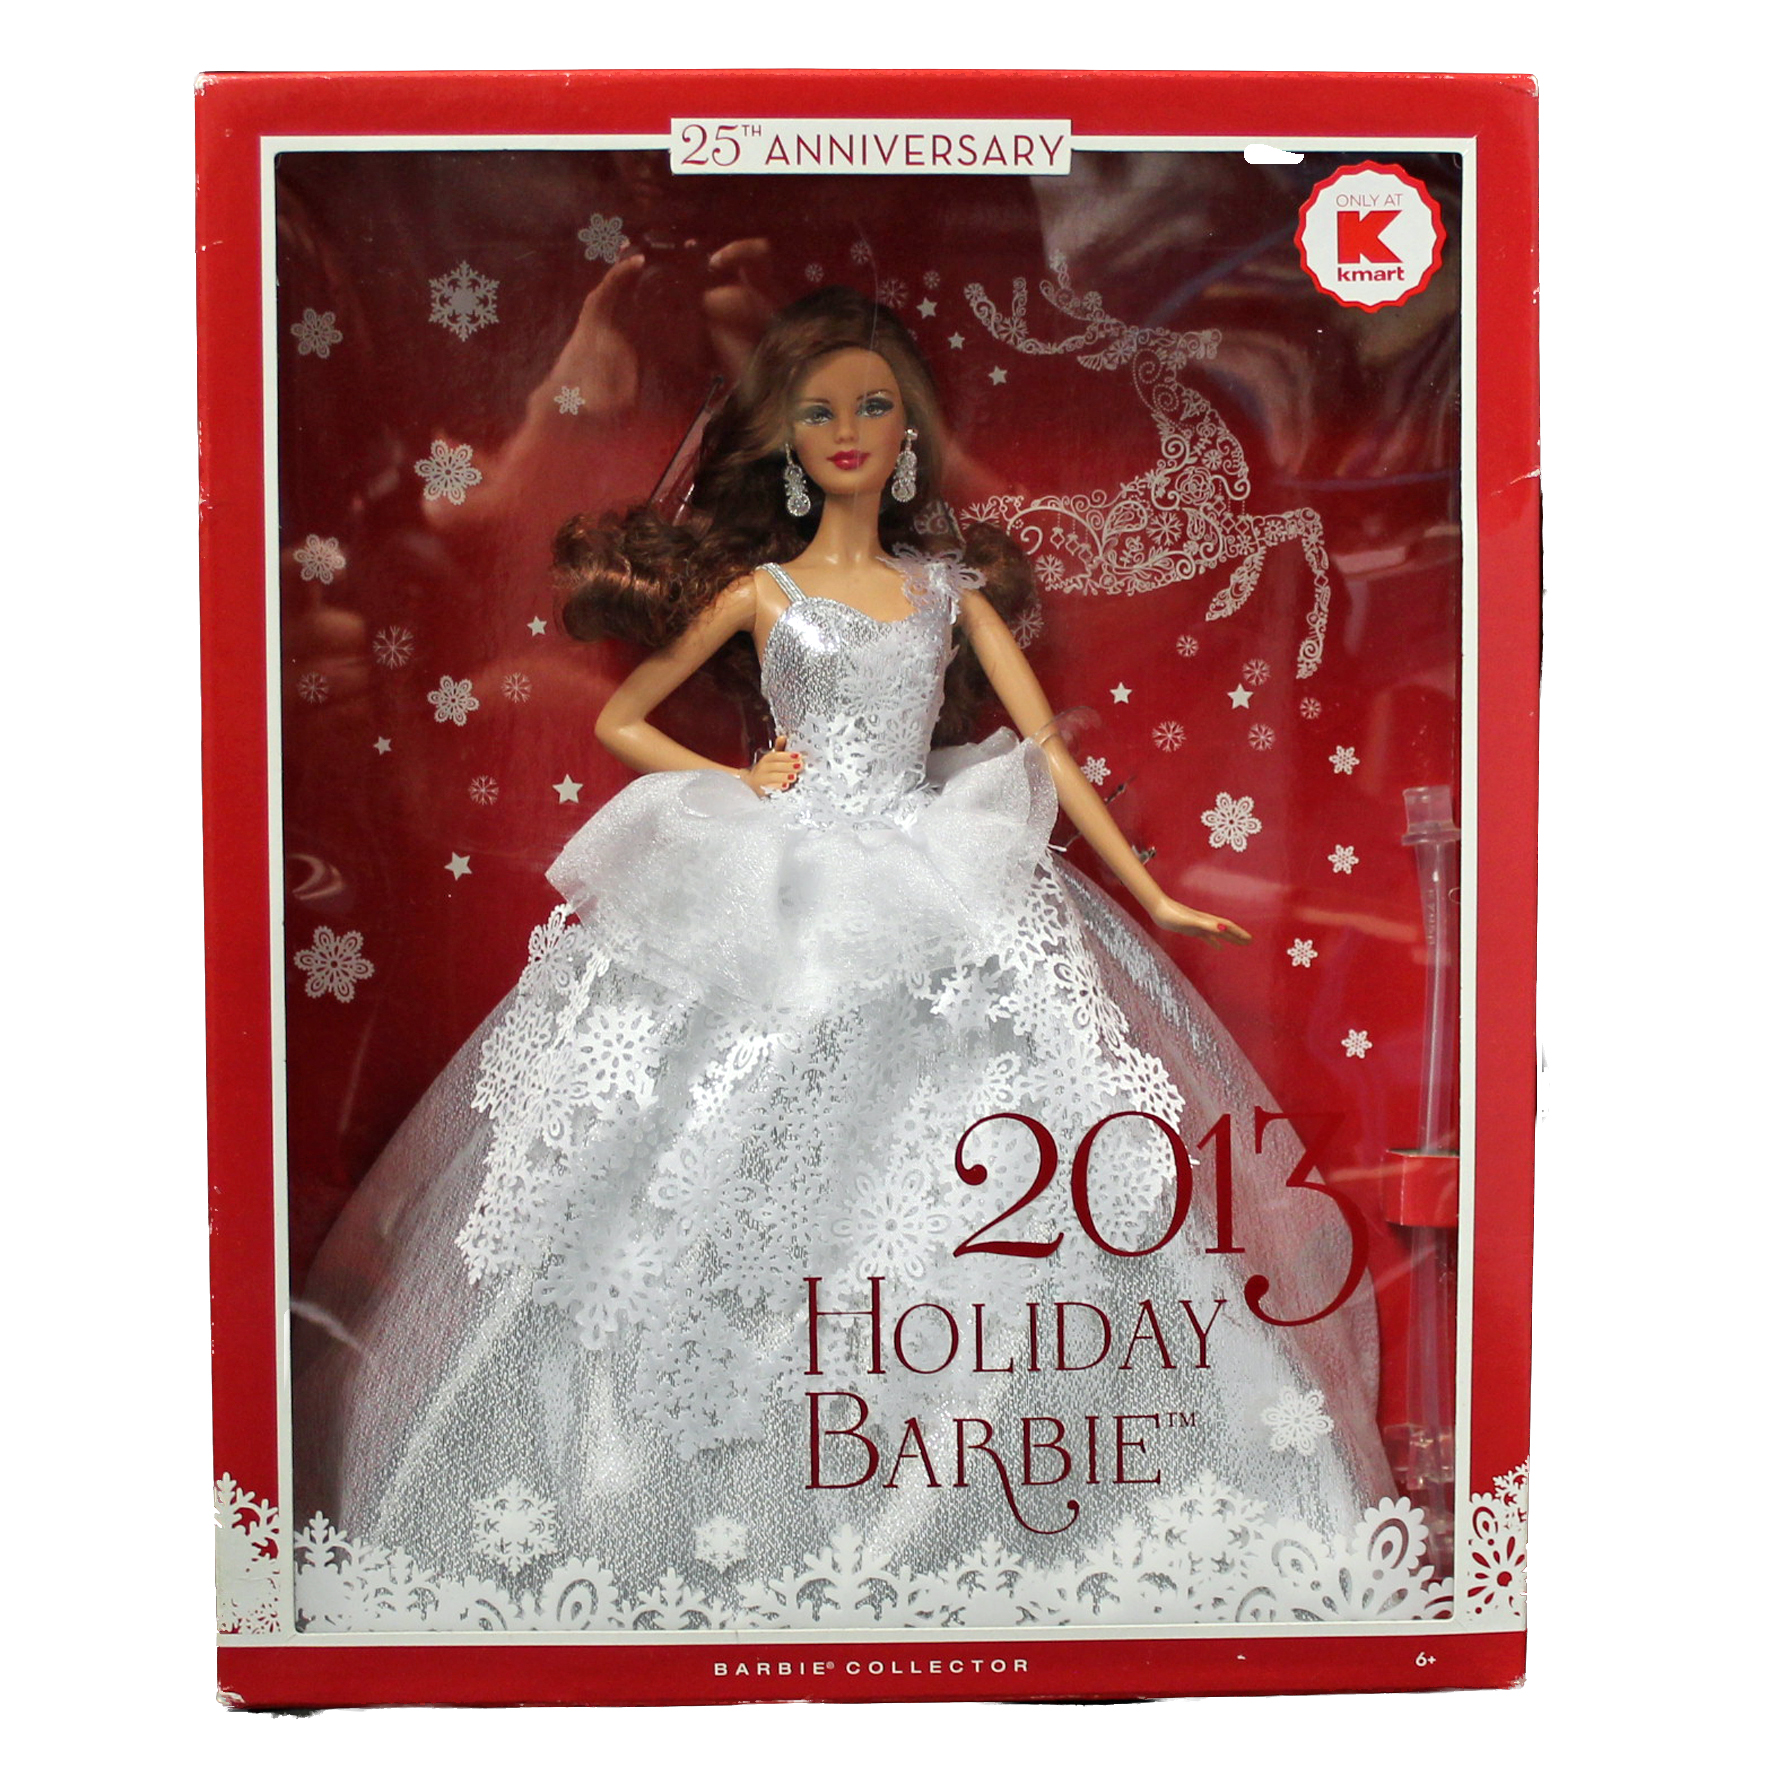 25th anniversary holiday barbie